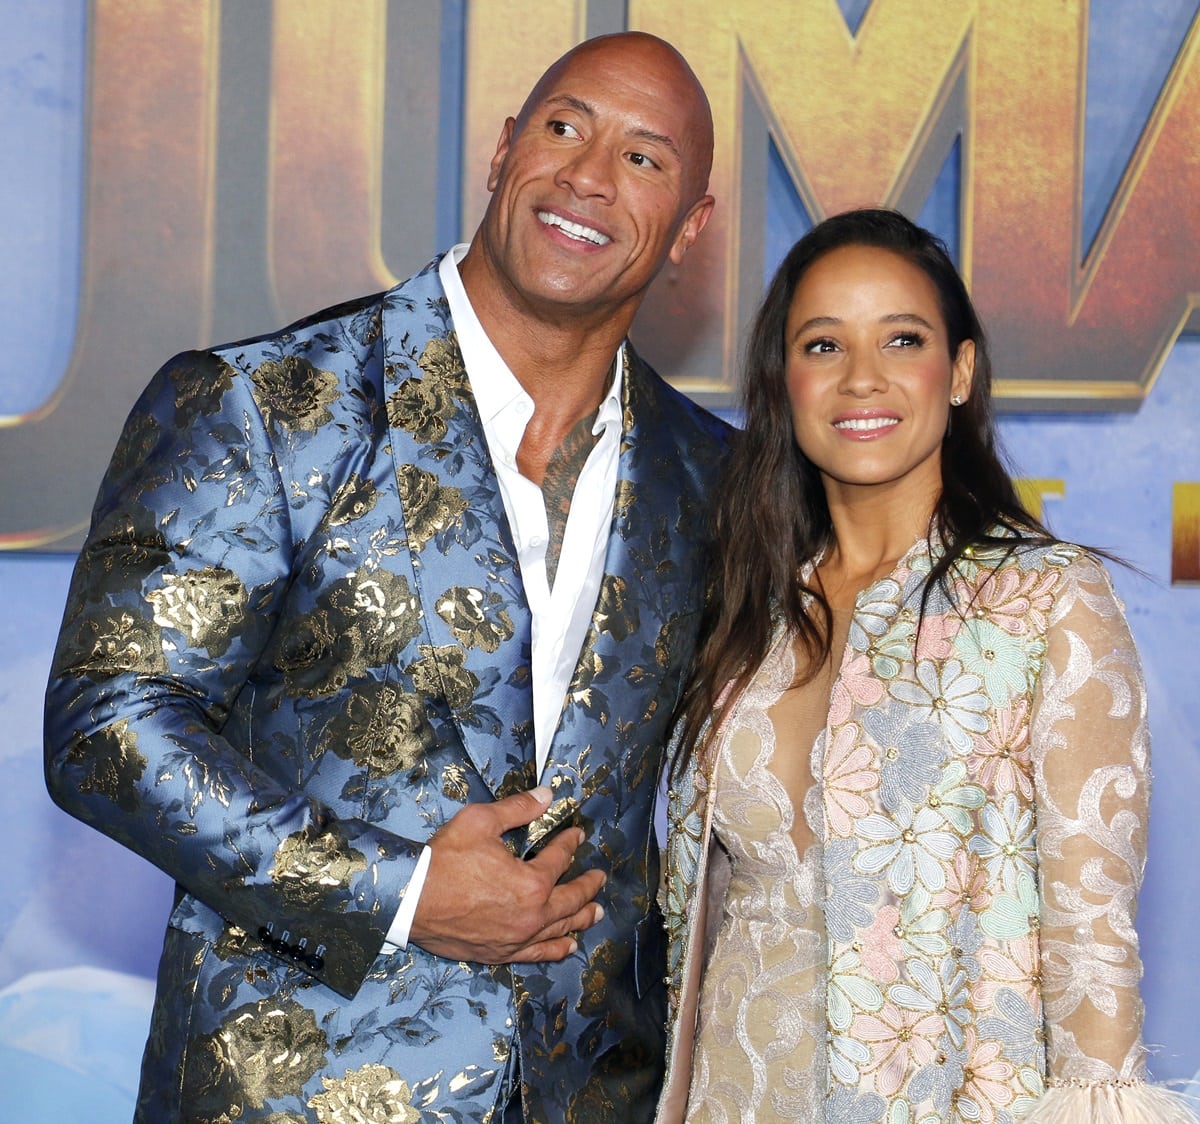 Dania Ramirez stands at 5 feet 4 ½ inches (163.8 cm) tall, while Dwayne Johnson, also known as The Rock, is notably taller at 6 feet 2 ½ inches (189.2 cm), with his peak height being 6 feet 3 inches (190.5 cm)